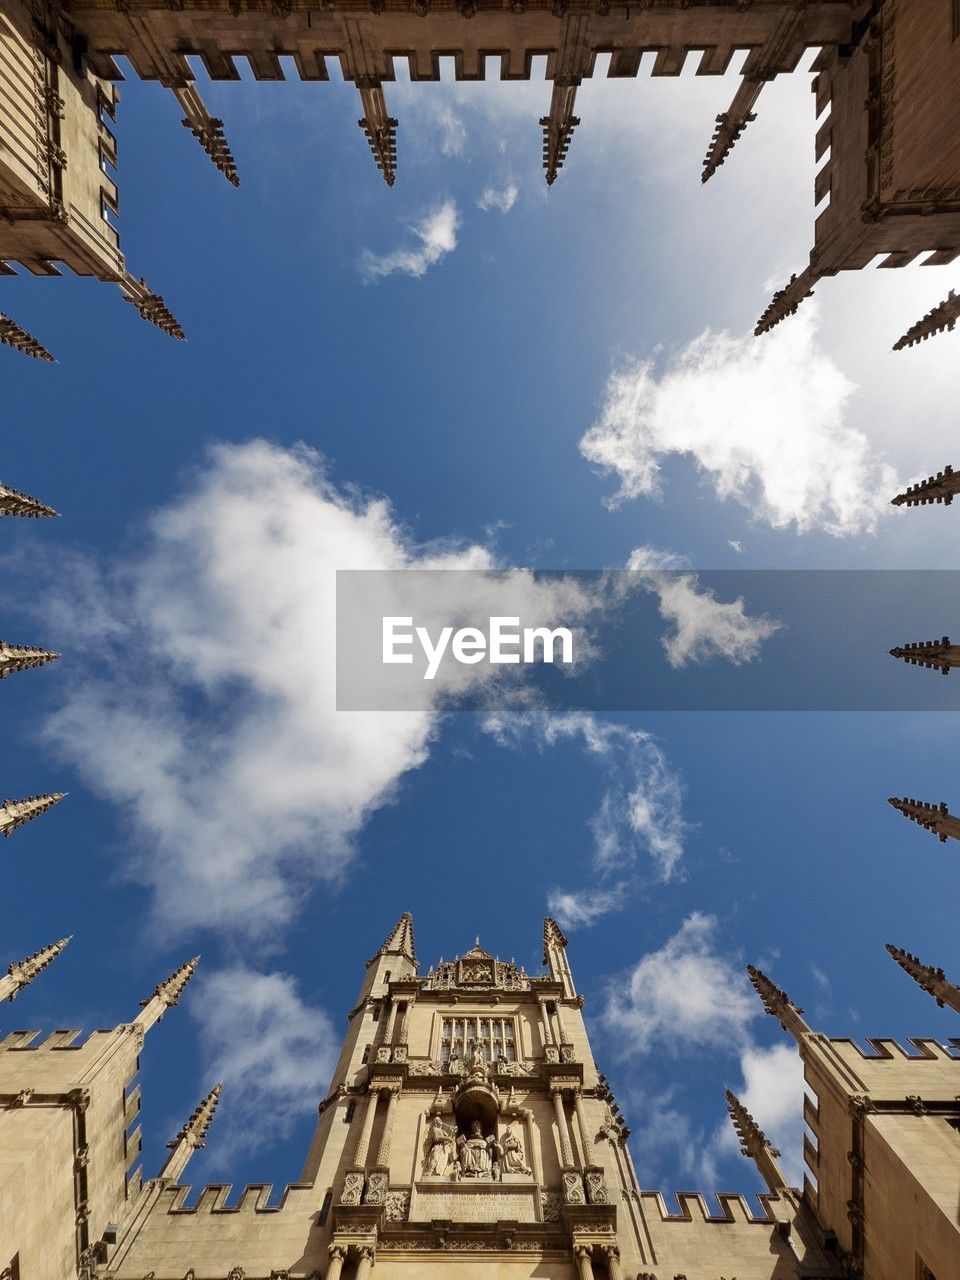 Low angle view of oxford bodleian library spires against blue sky with clouds